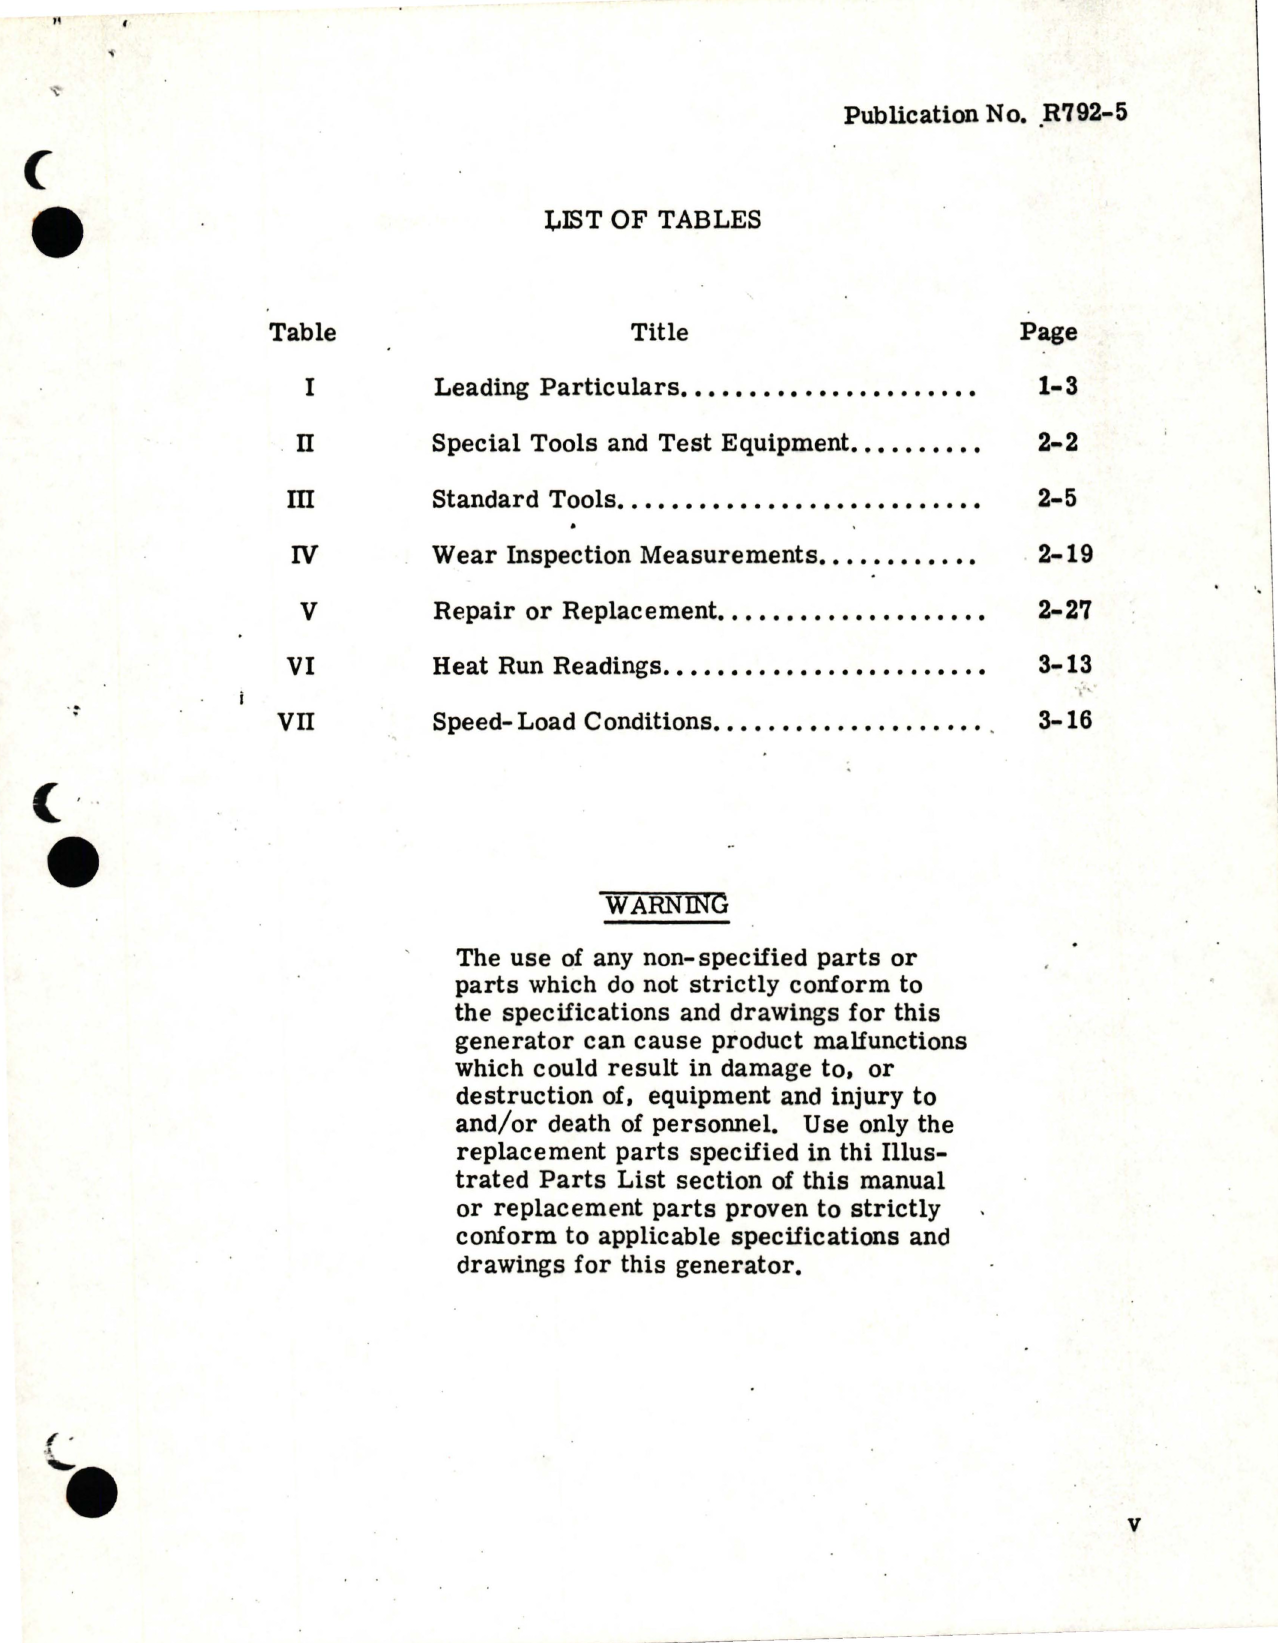 Sample page 7 from AirCorps Library document: Maintenance Instructions with Illustrated Parts List for Starter Generator - Types 30E20-11-C, 30E20-39-A, 30E20-41-B, 30E20-49-B, and 30E20-97-A 